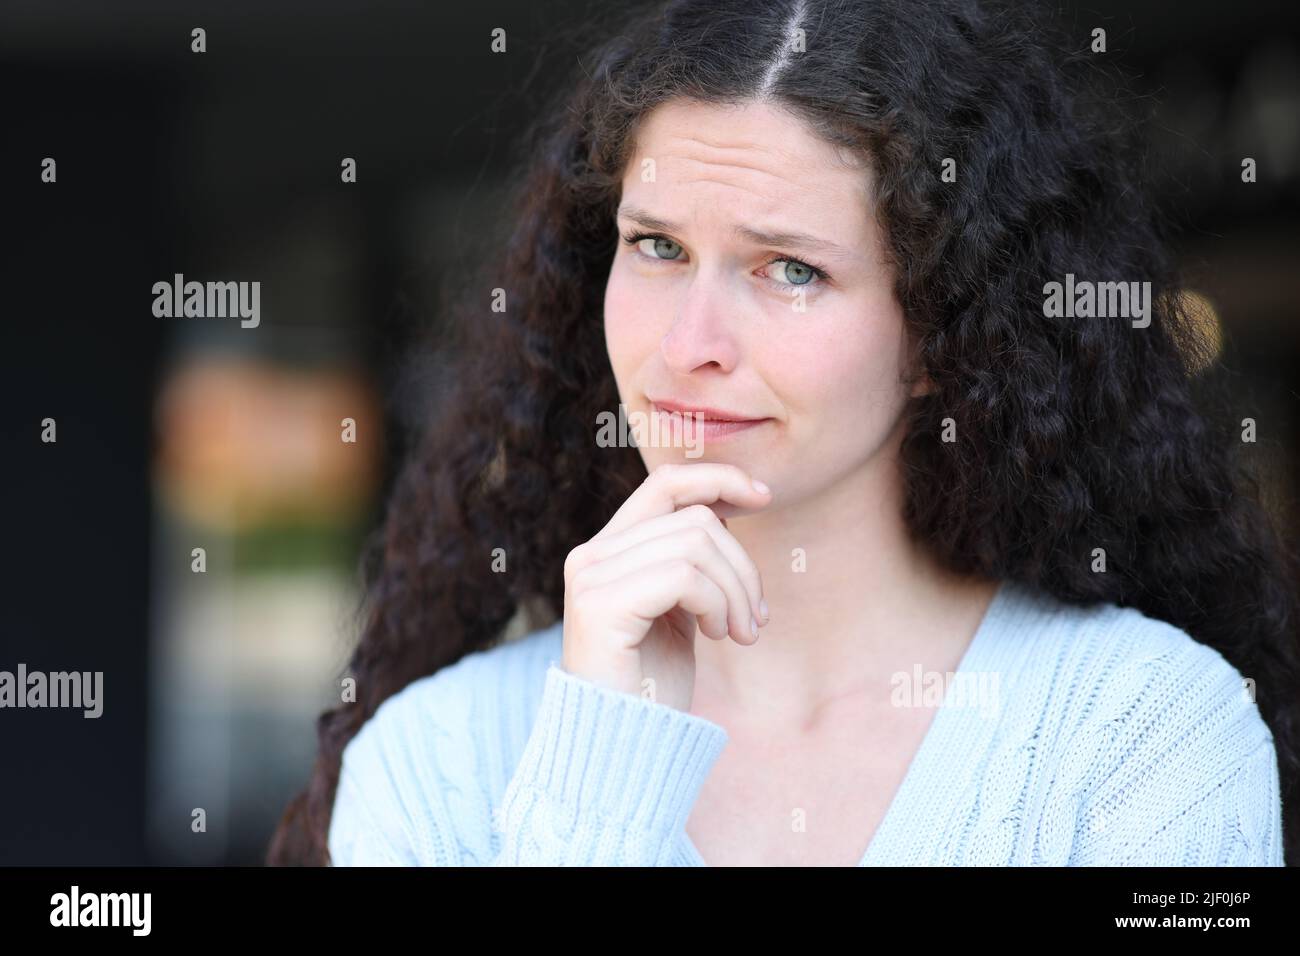 Portrait of a suspicious woman looking at camera in the street Stock Photo